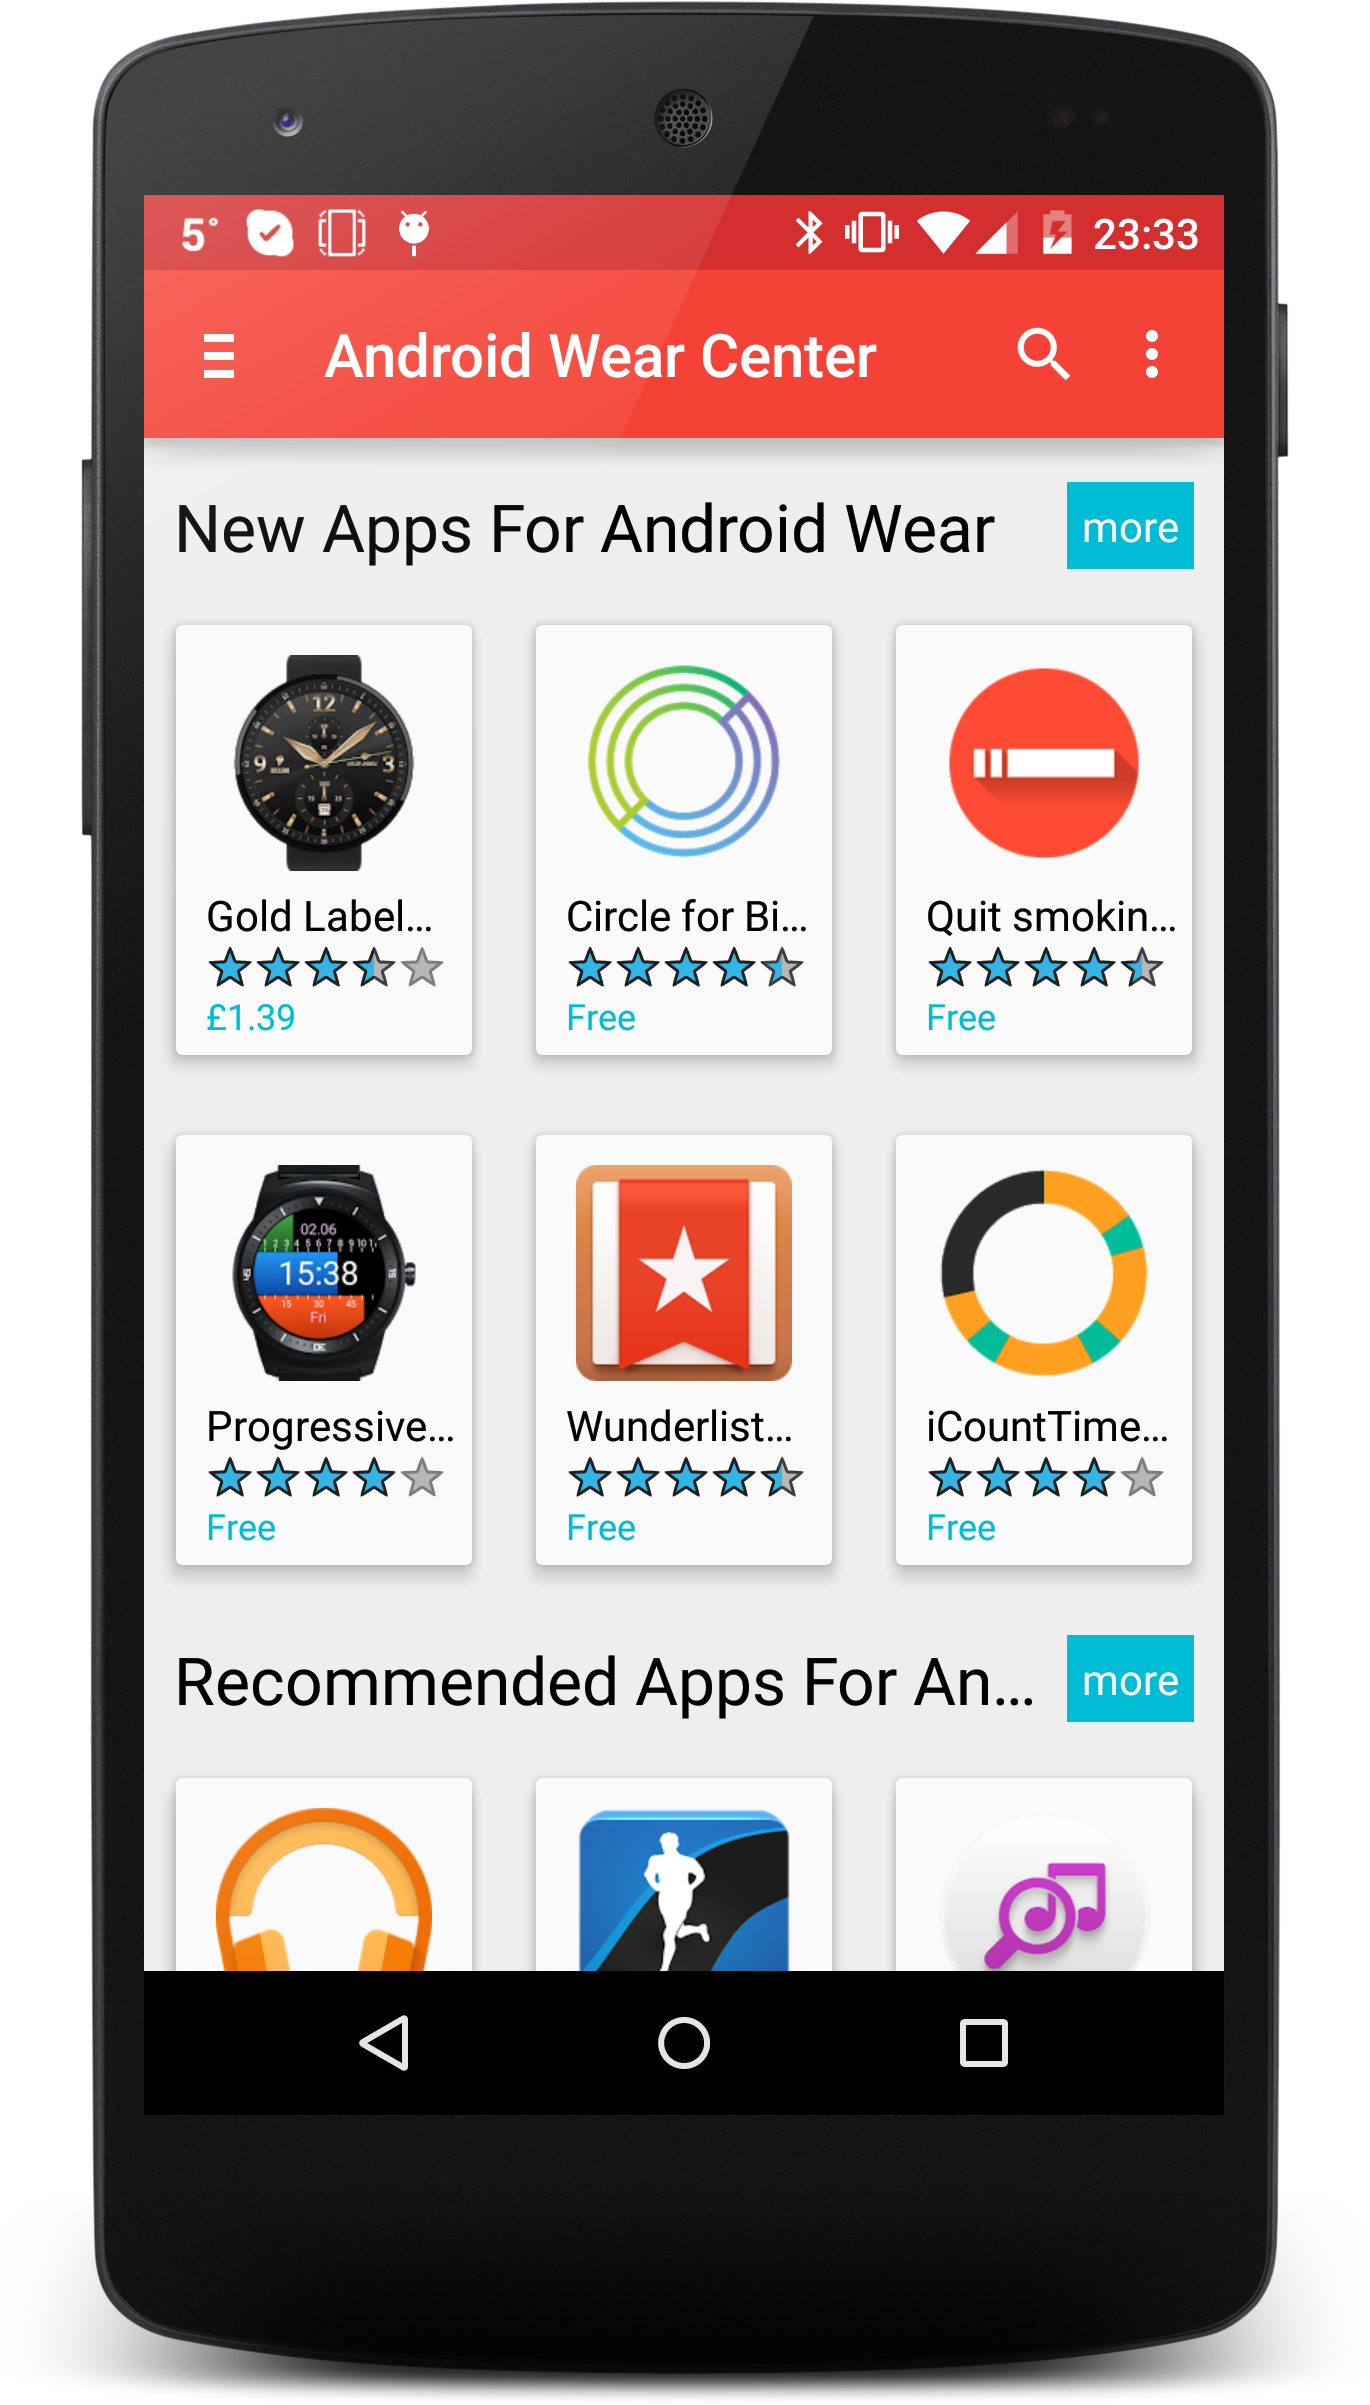 Android application Wear OS Center - Android Wear Apps, Games & News screenshort